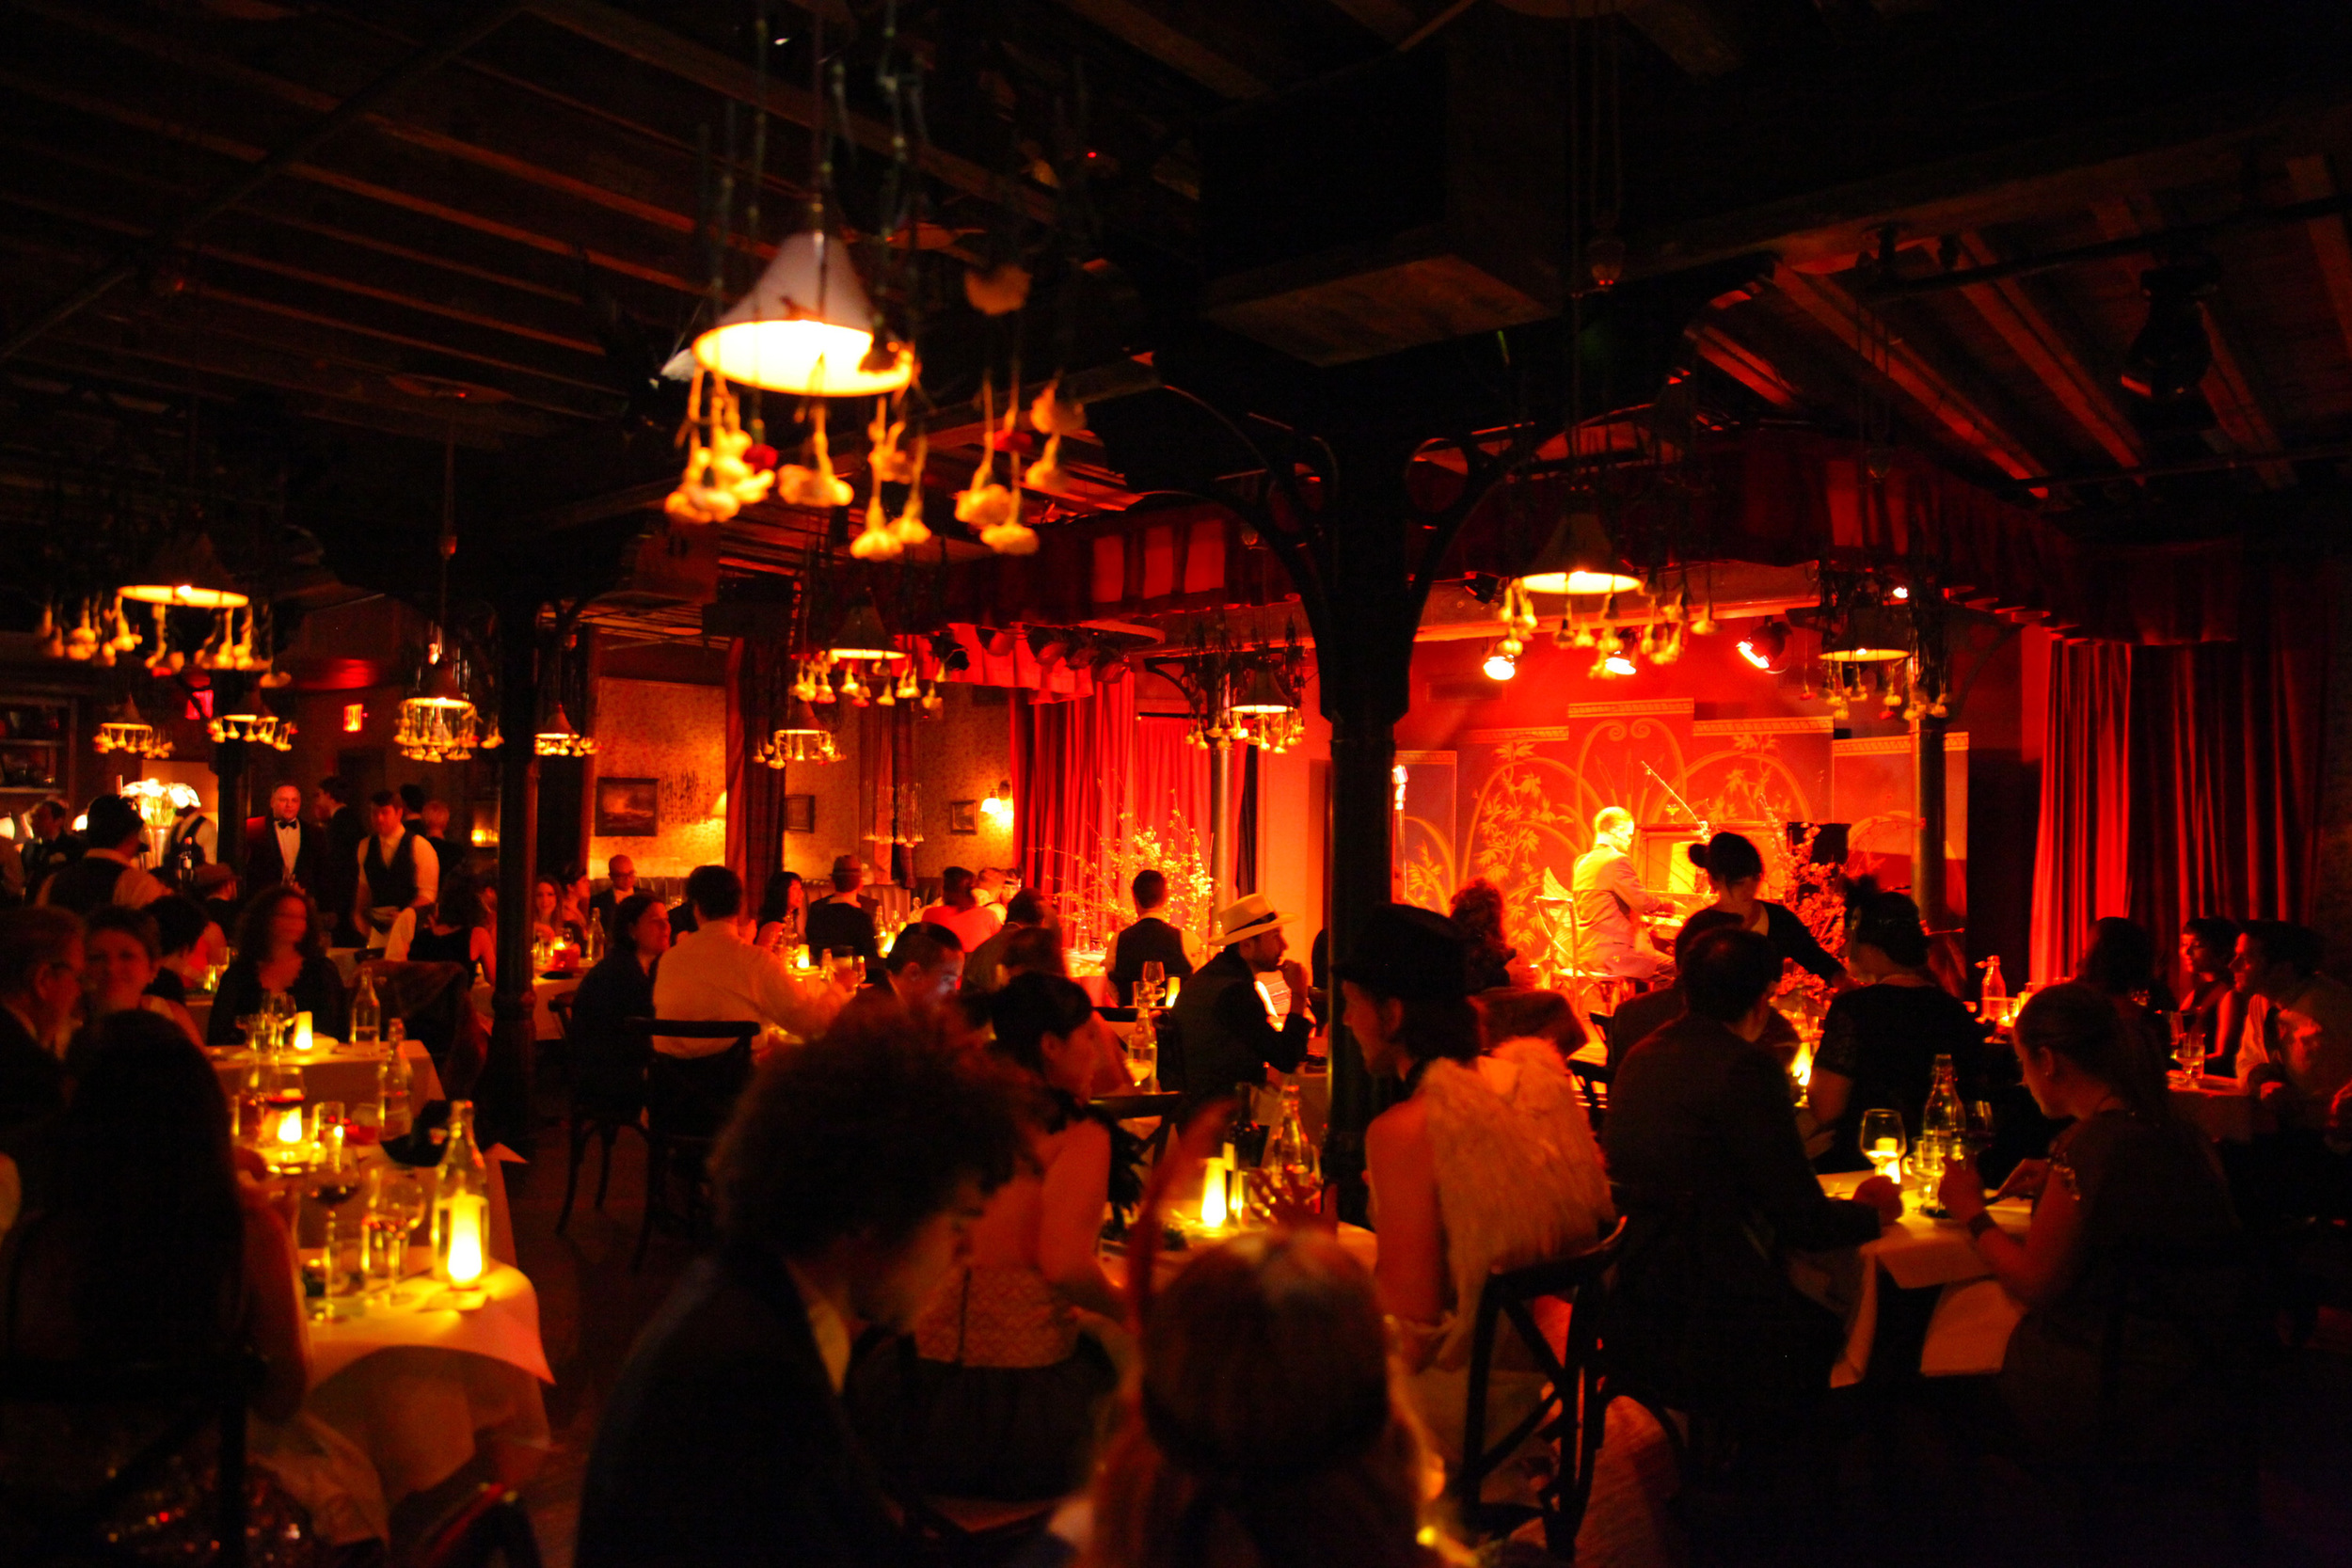   Photo: Courtesy of The McKittrick Hotel  